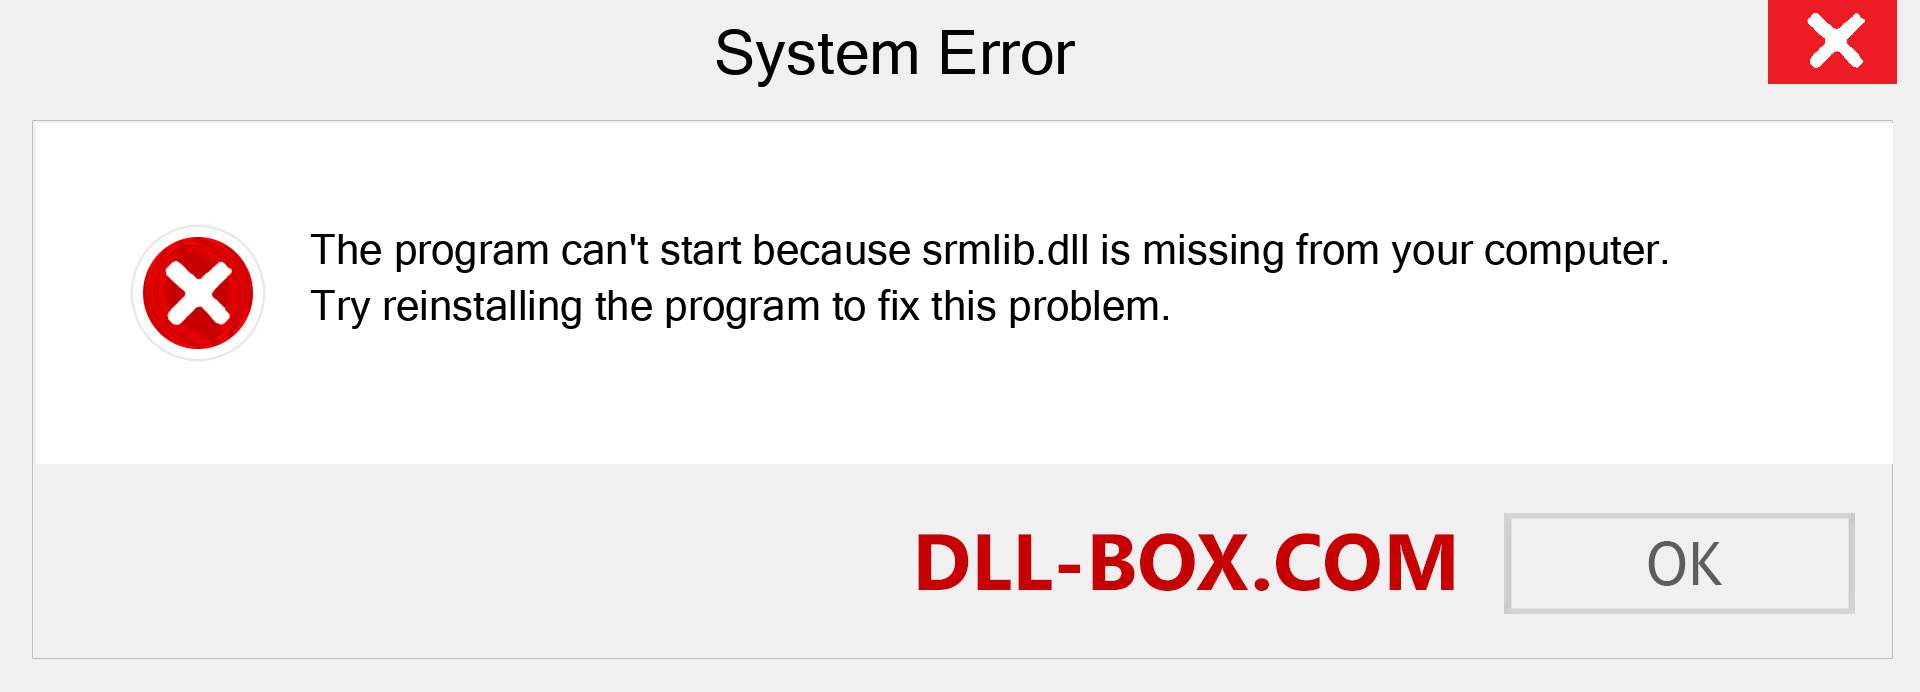  srmlib.dll file is missing?. Download for Windows 7, 8, 10 - Fix  srmlib dll Missing Error on Windows, photos, images